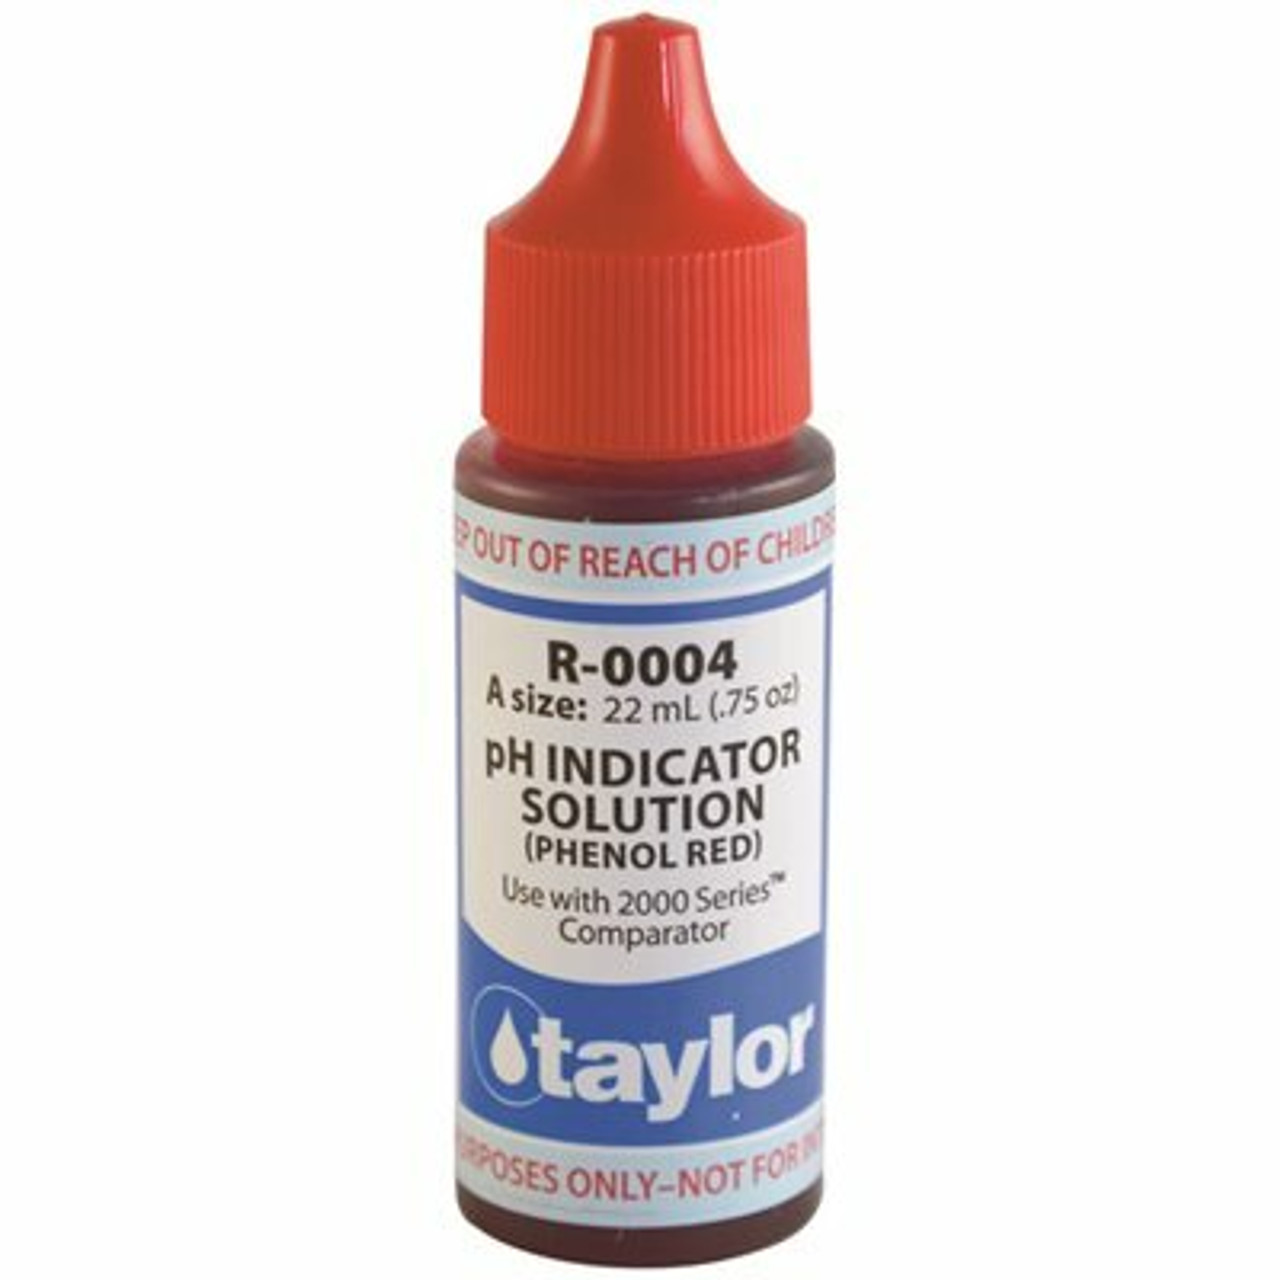 Taylor 0.75 Oz. Bottle Test Kit Replacement Reagent Refill Bottles Phenolic Red Reagent